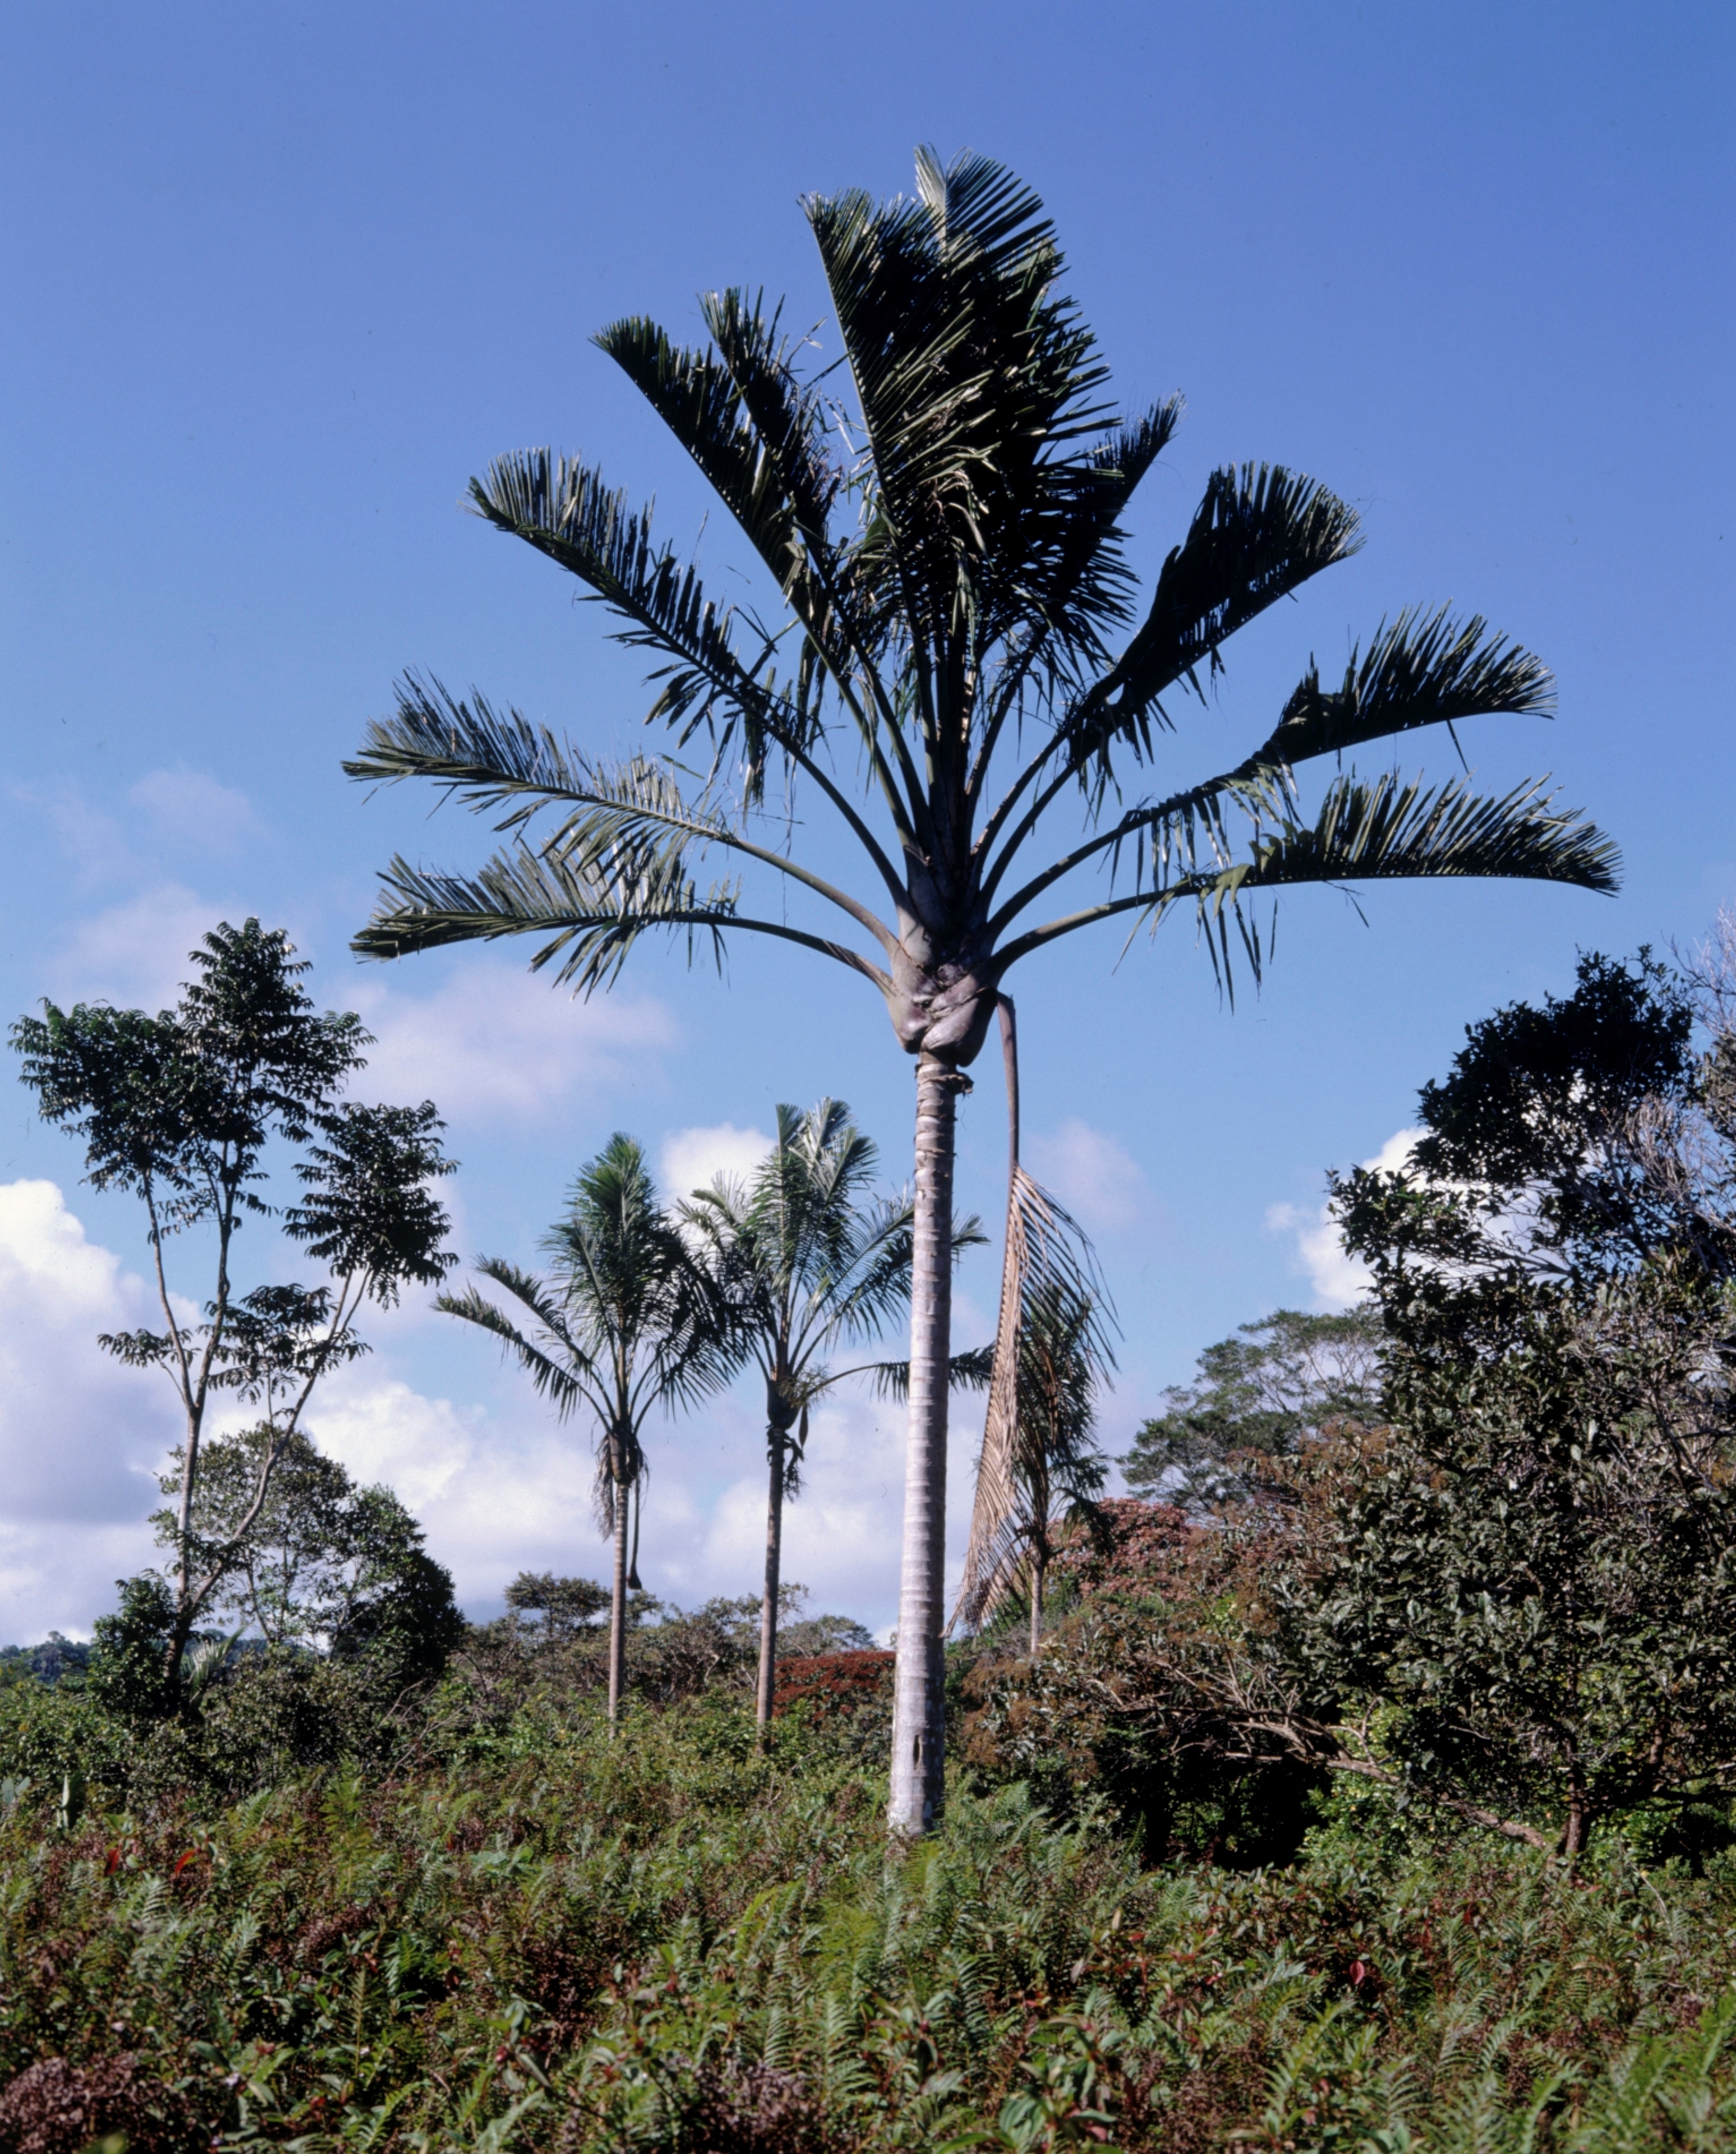 A palm tree emerges from a green landscape of shrub, spreading its arms over a 180 degree arc